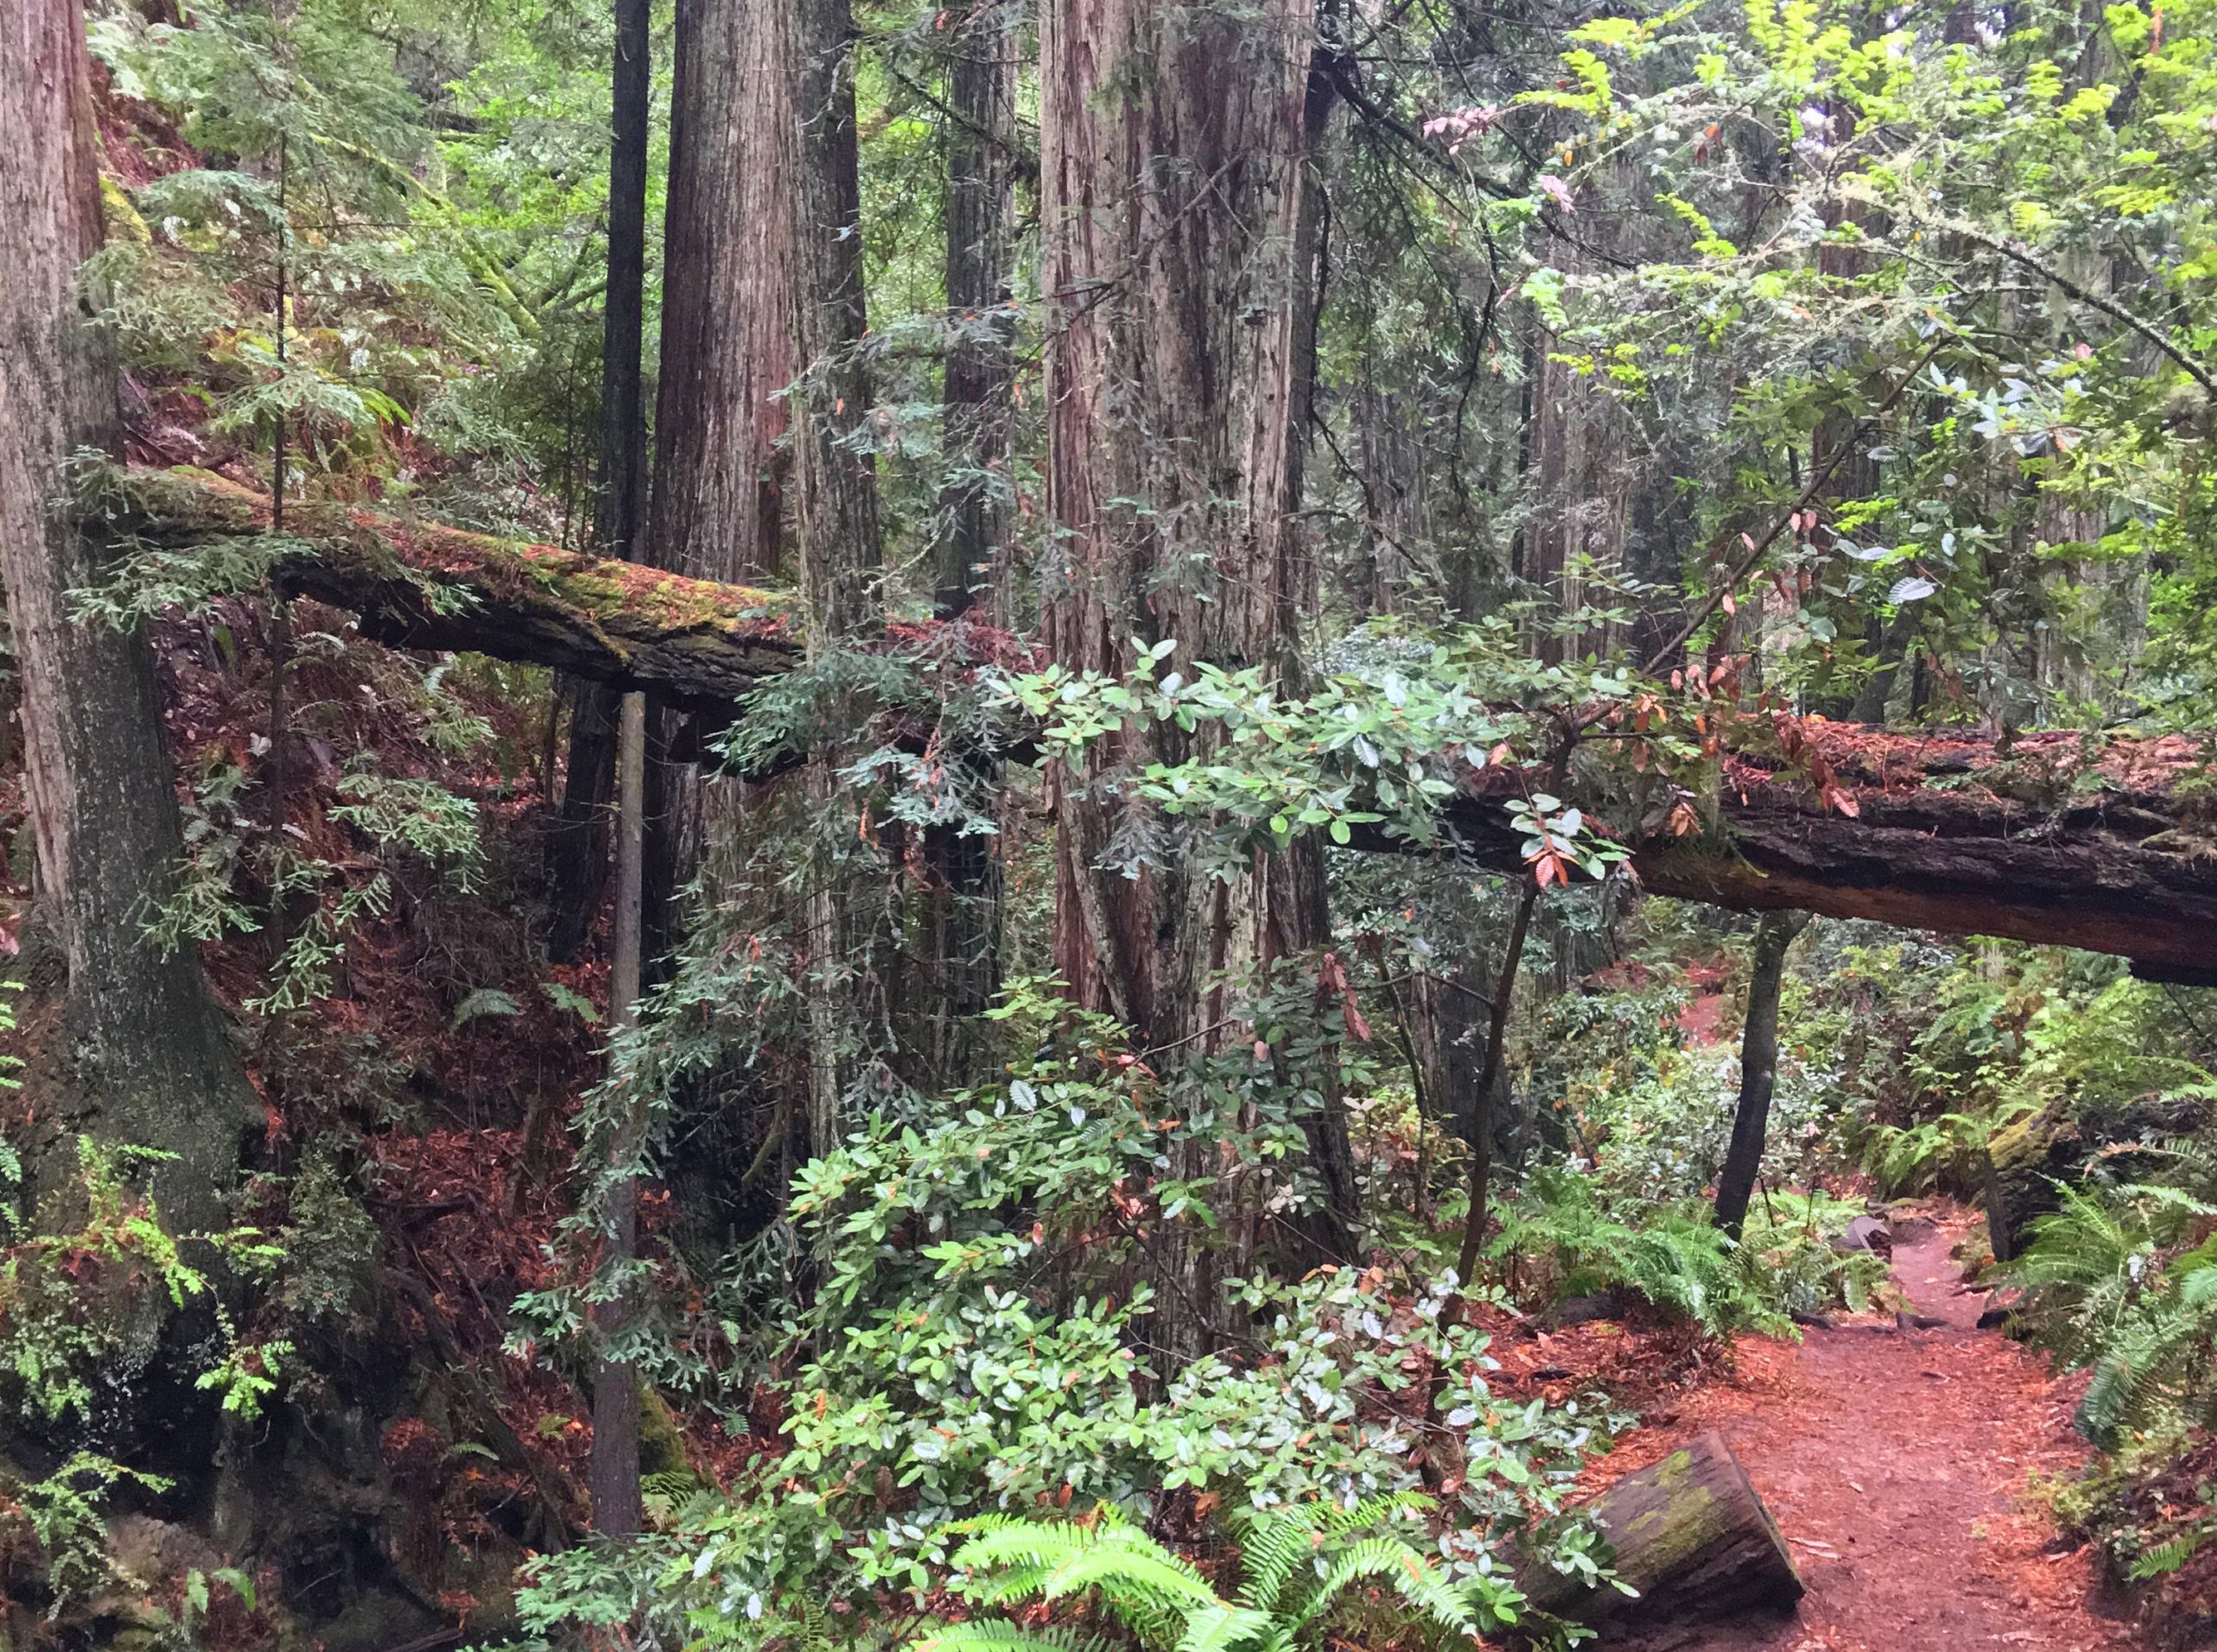 The Steep Ravine Trail passes under fallen Redwood trees as you hike next to Webb Creek.